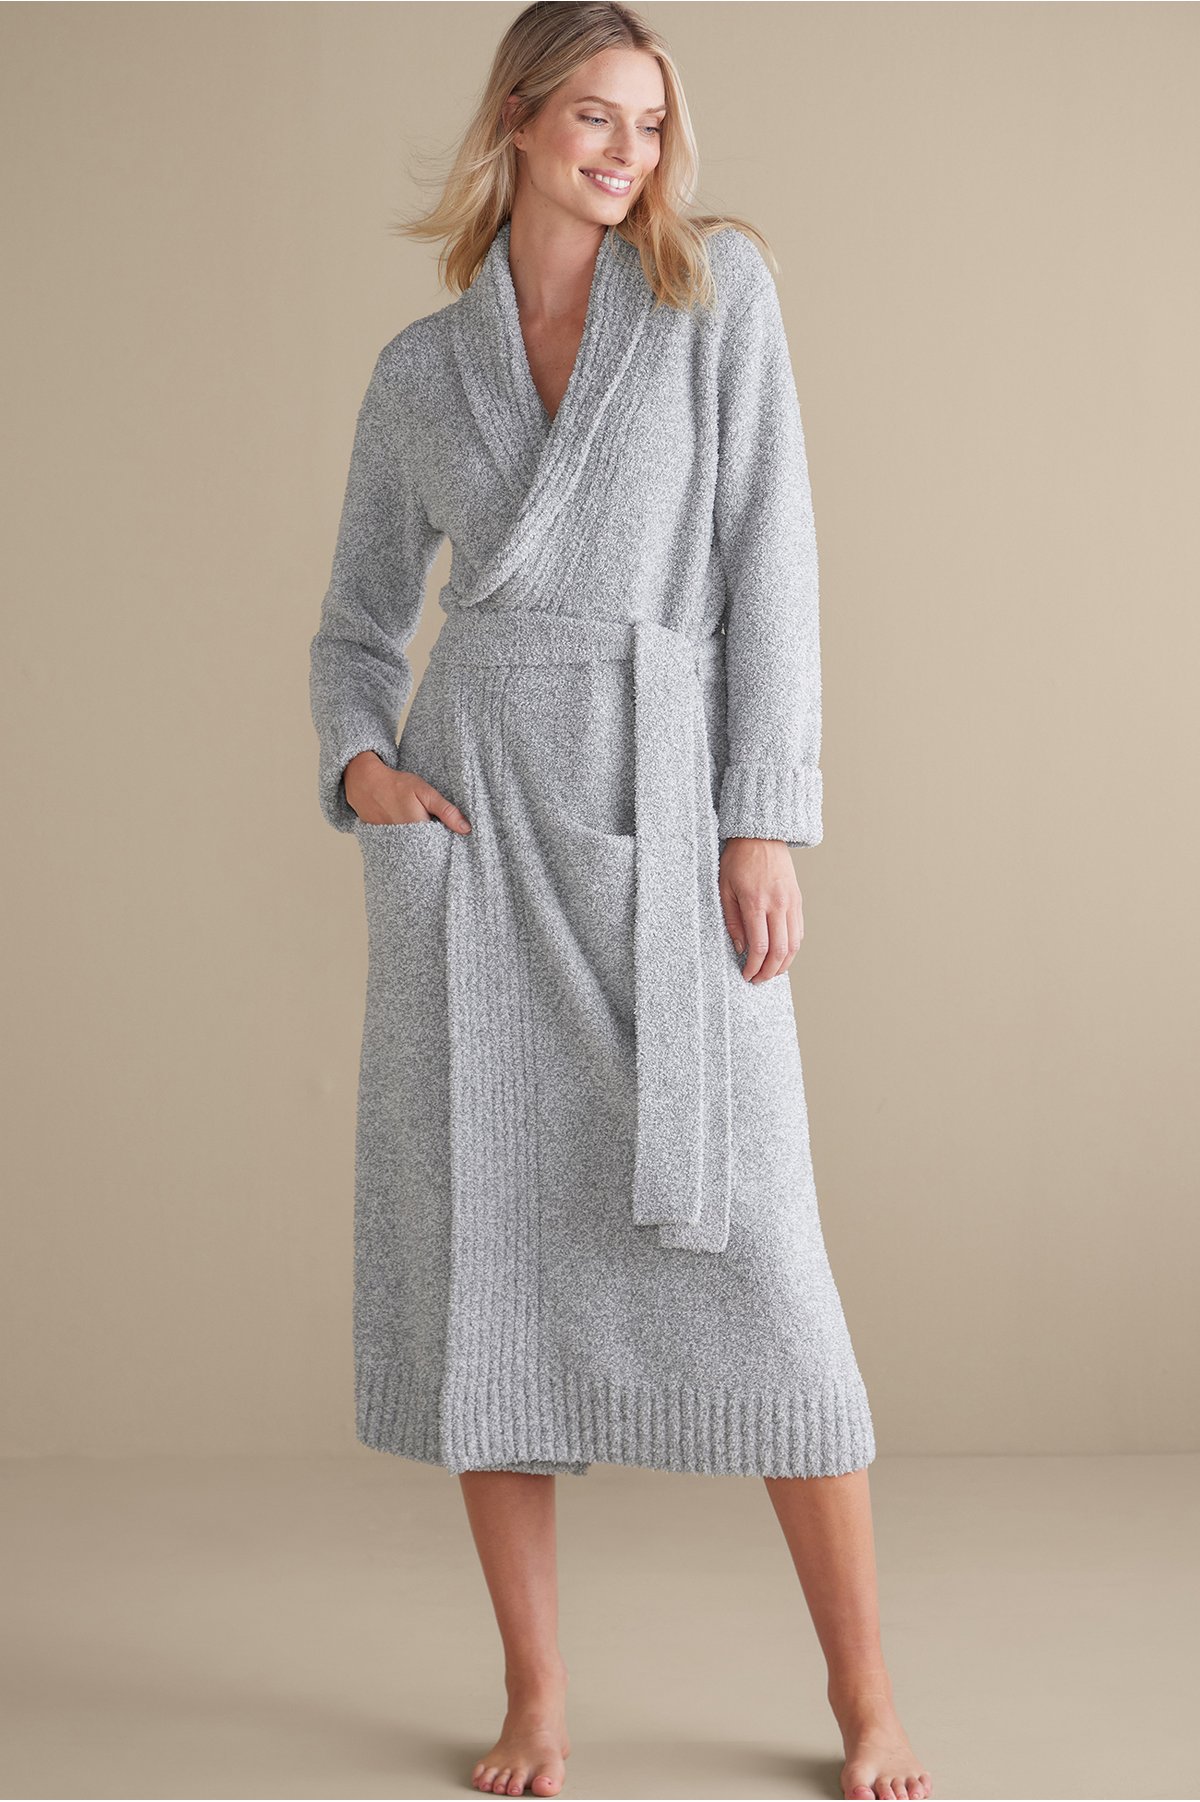 Women's Petites Orabella Robe by Soft Surroundings, in Grey Marle size PXS (2-4)